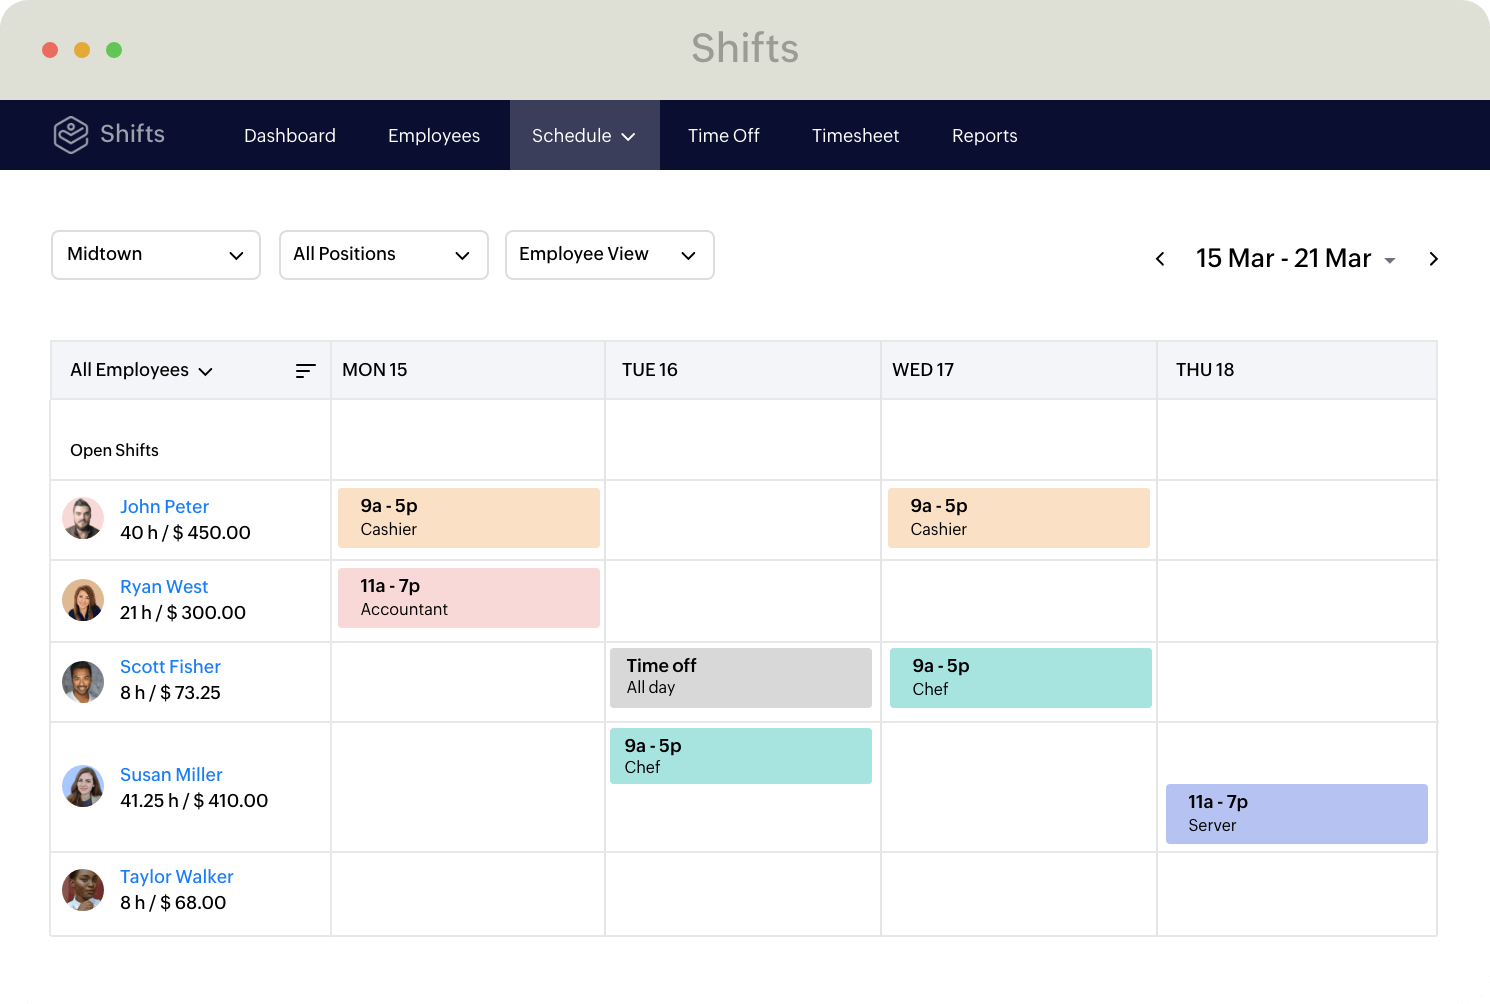 Empower your team with flexible schedules